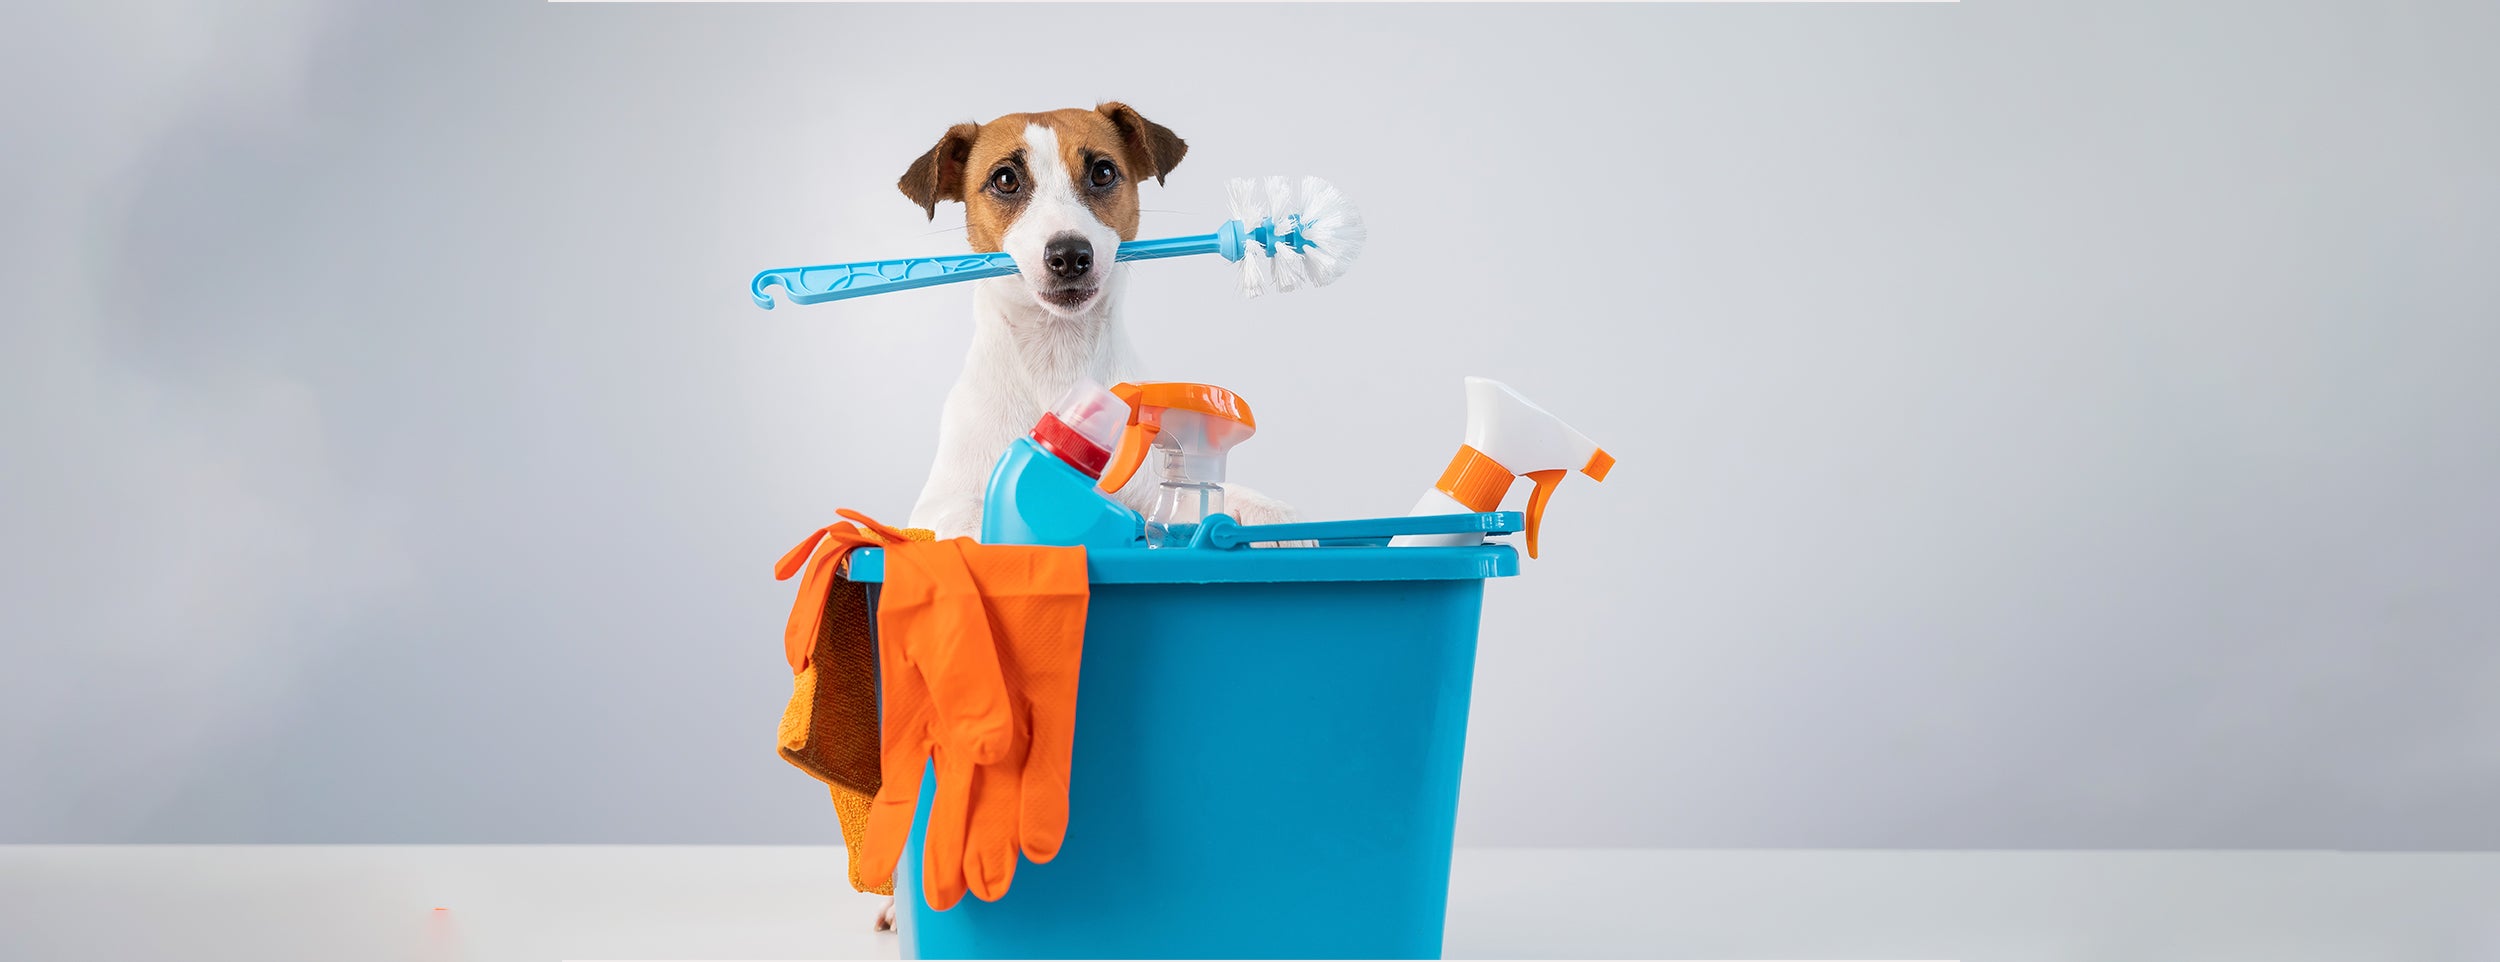 Safe storage of disinfectant for dogs